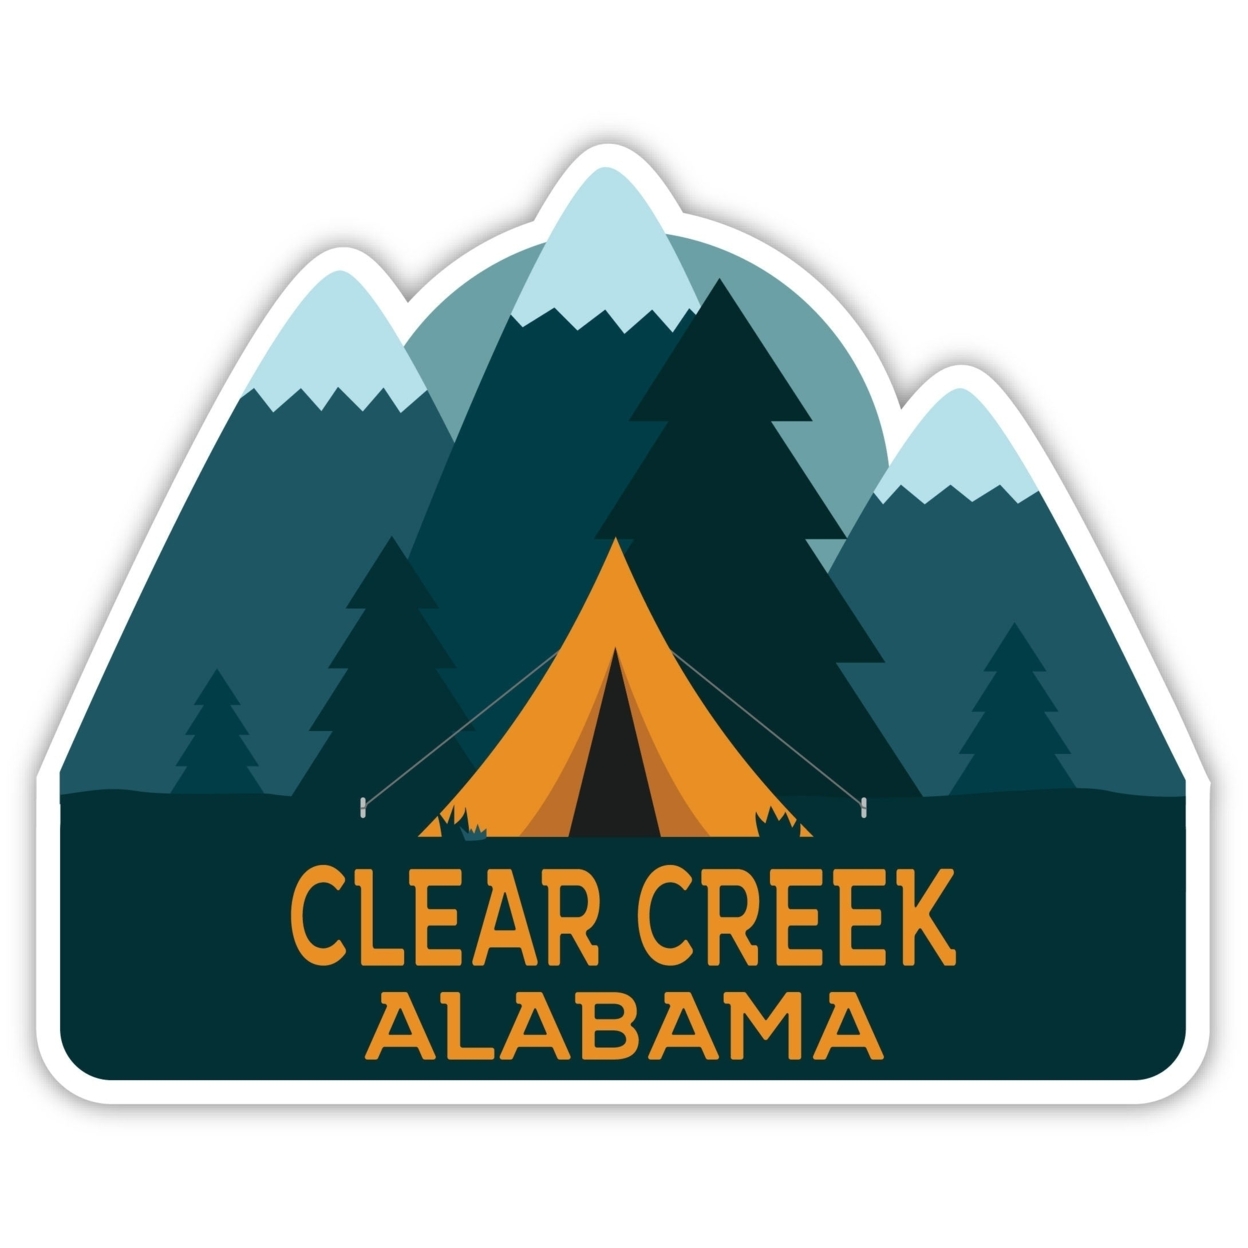 Clear Creek Alabama Souvenir Decorative Stickers (Choose Theme And Size) - 4-Pack, 6-Inch, Tent